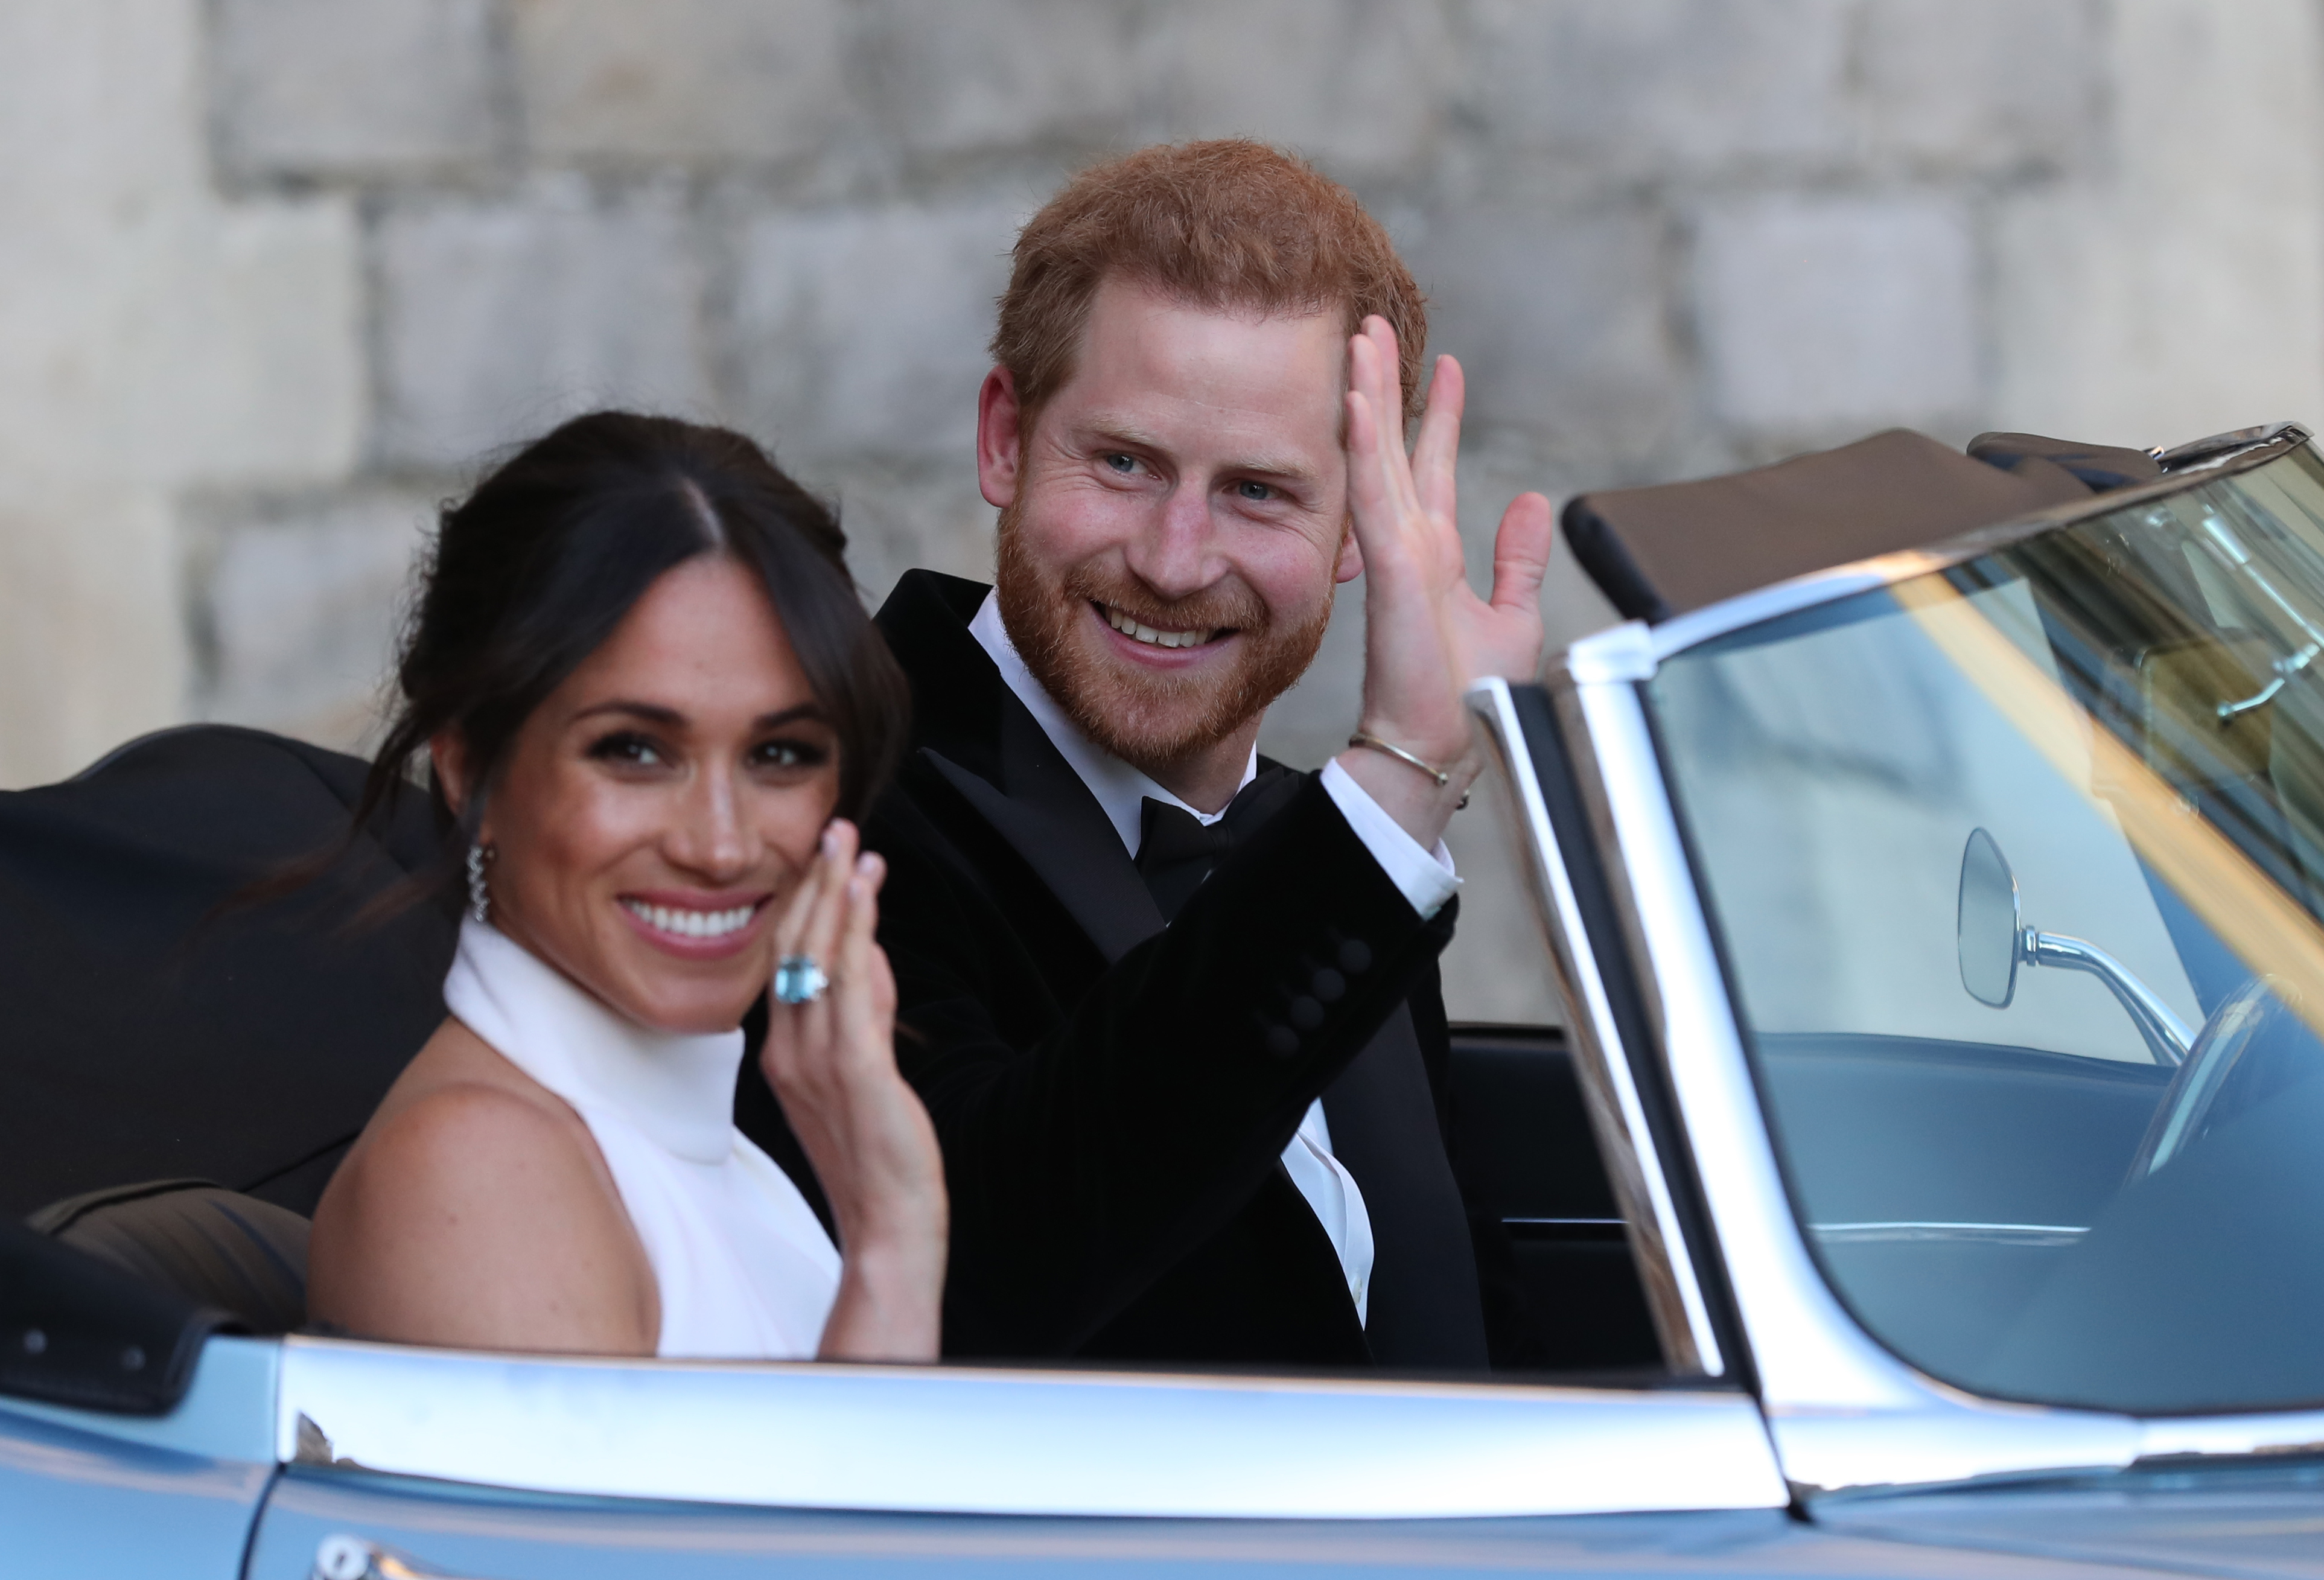 Prince Harry and Meghan Markle wave as they leave Windsor Castle after their wedding to attend an evening reception